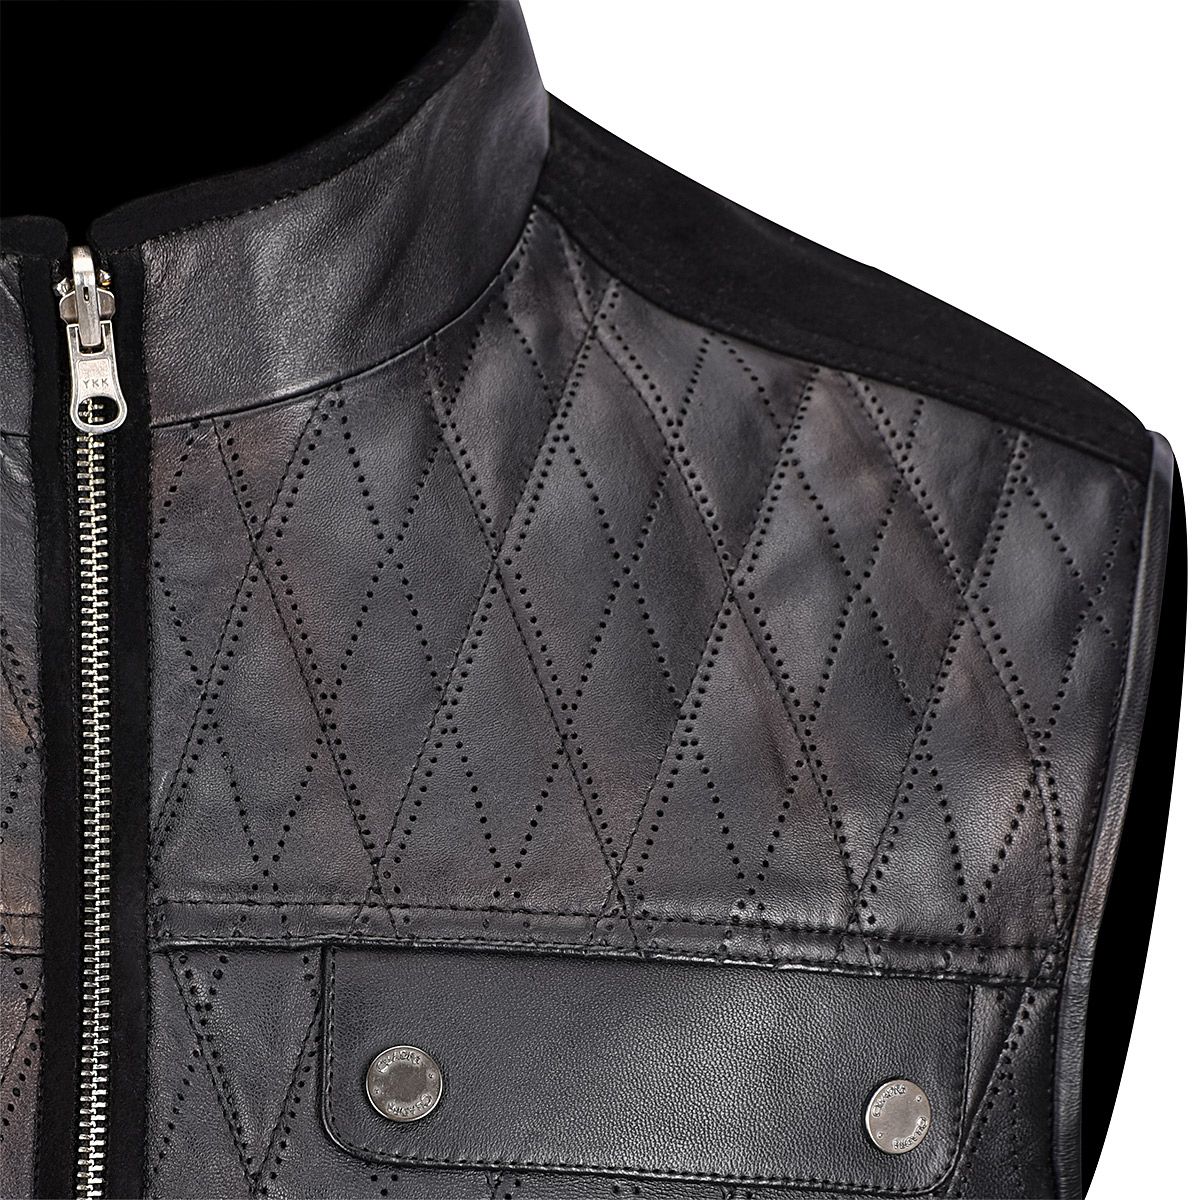 H302BOB- Cuadra black casual fashion reversible lambskin leather vest for men-Kuet.us - Cuadra Boots - Western Cowboy, Casual Fashion and Dress Boots